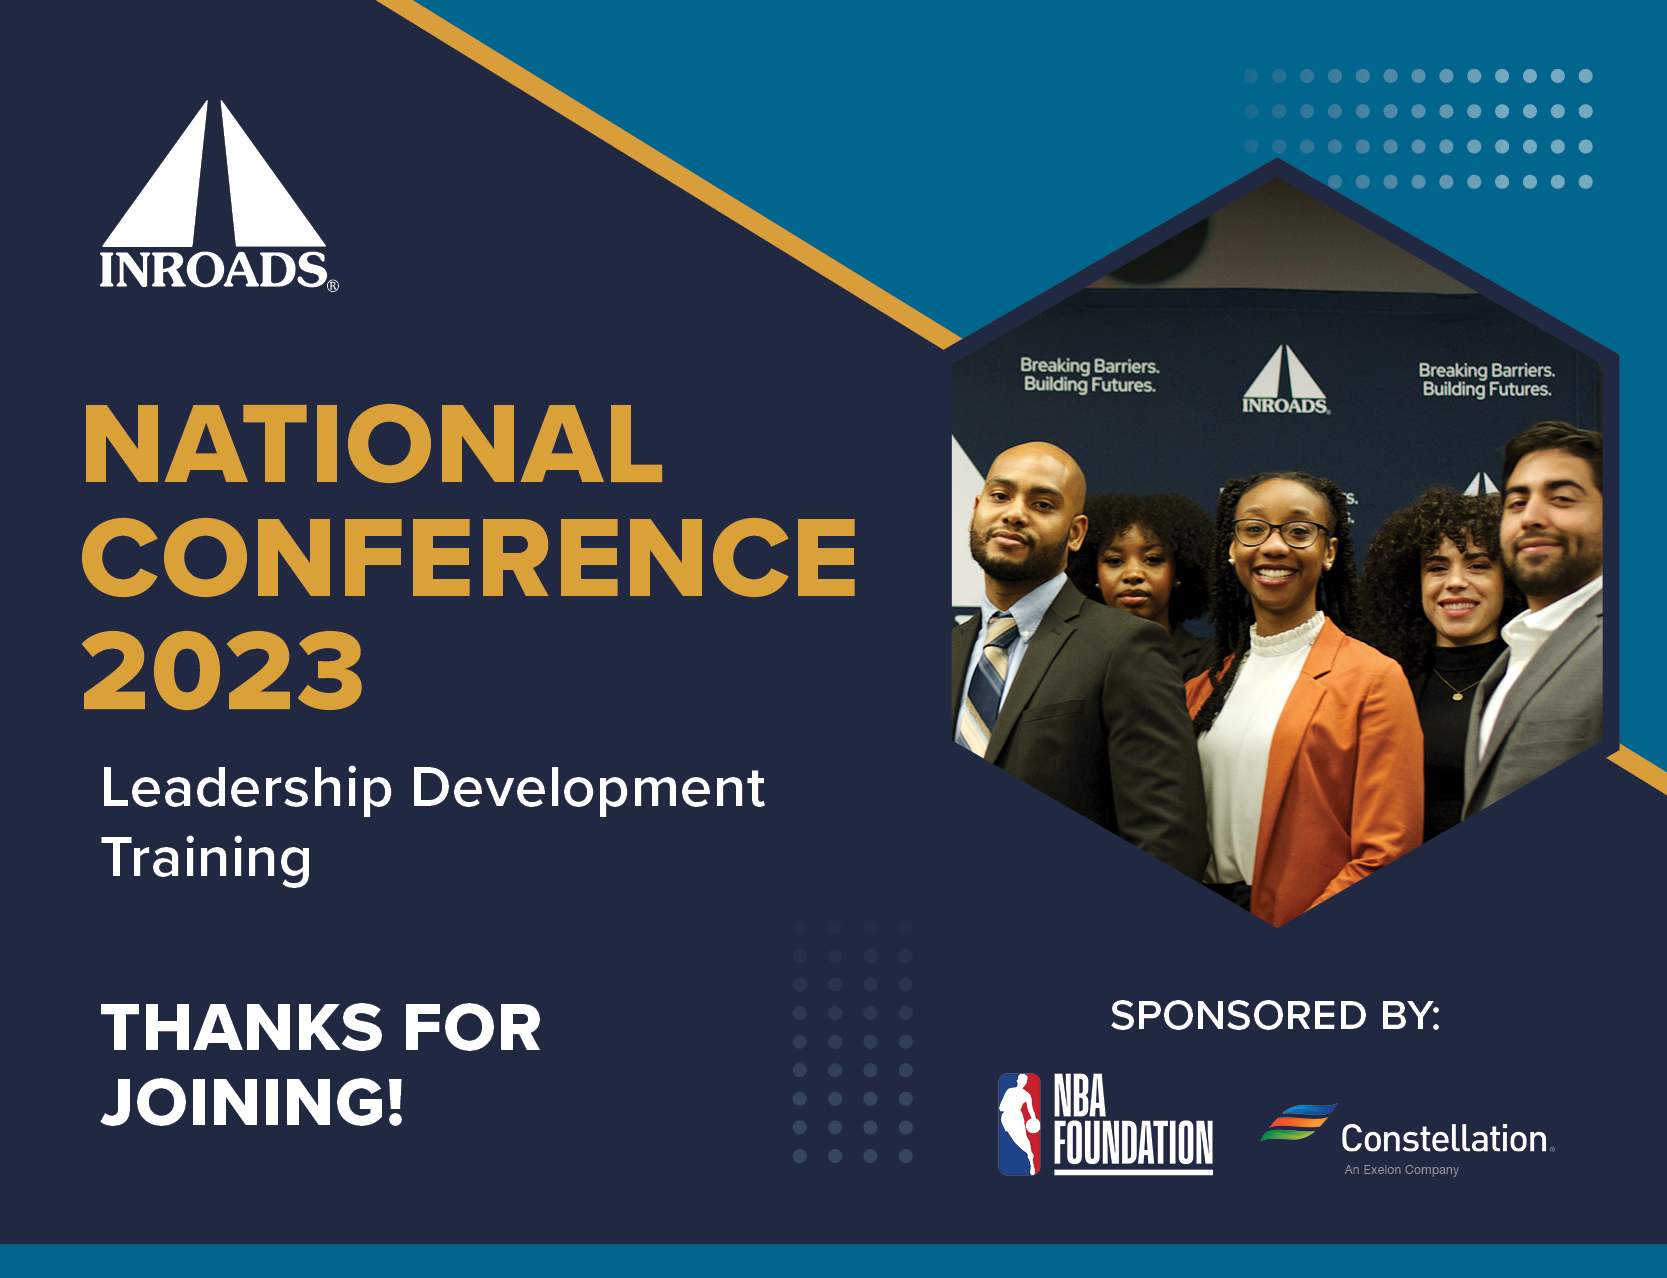 INROADS National Conference